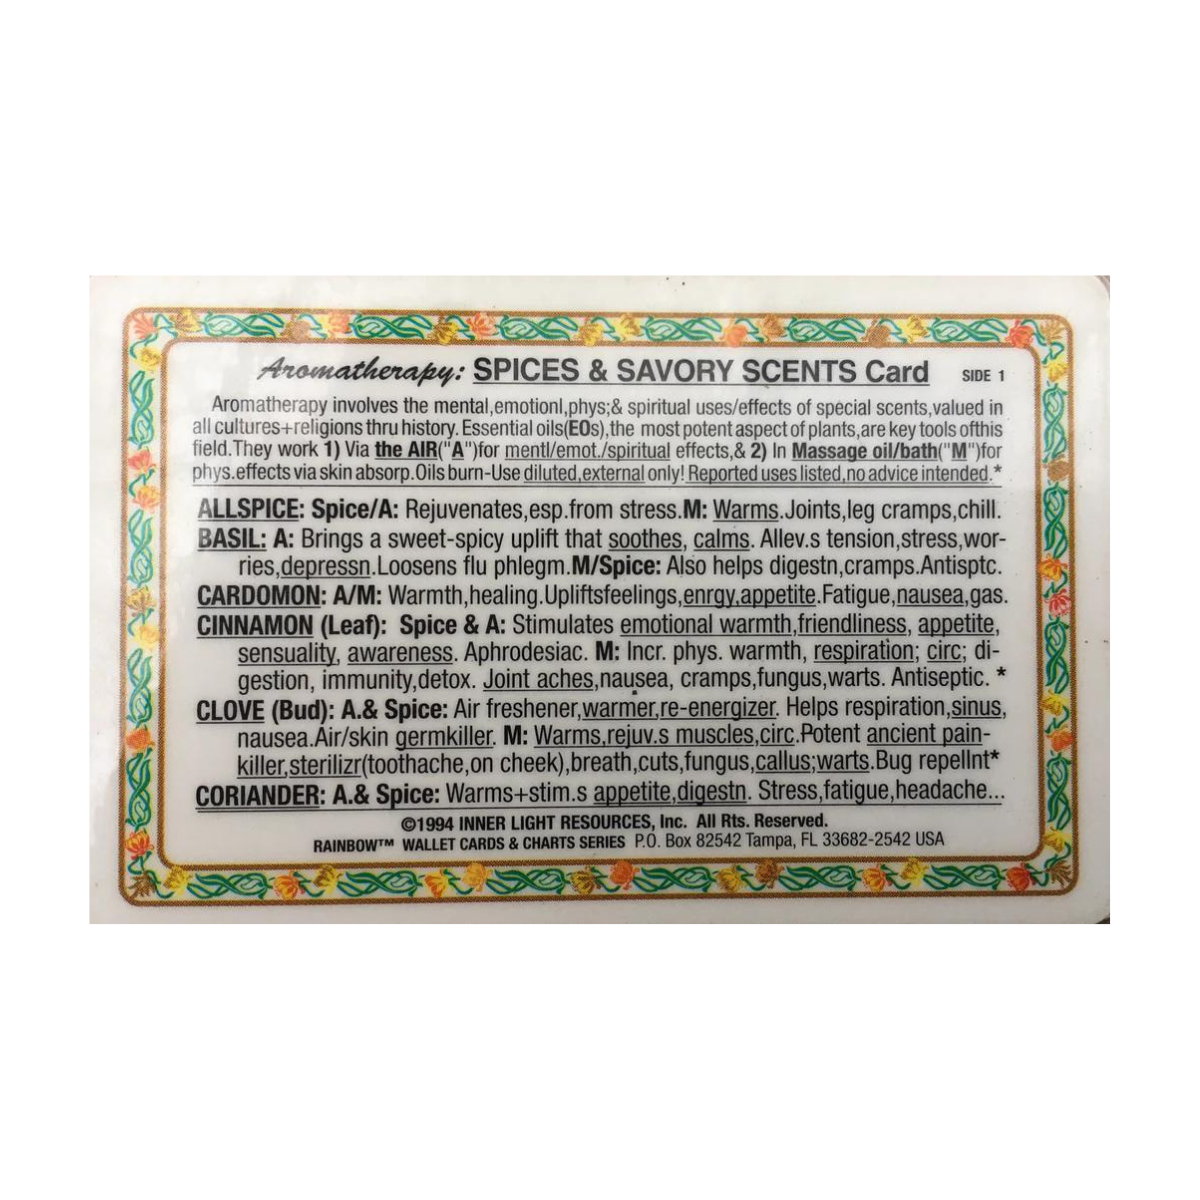 Aromatherapy: Spices & Savory Scents Wallet Card